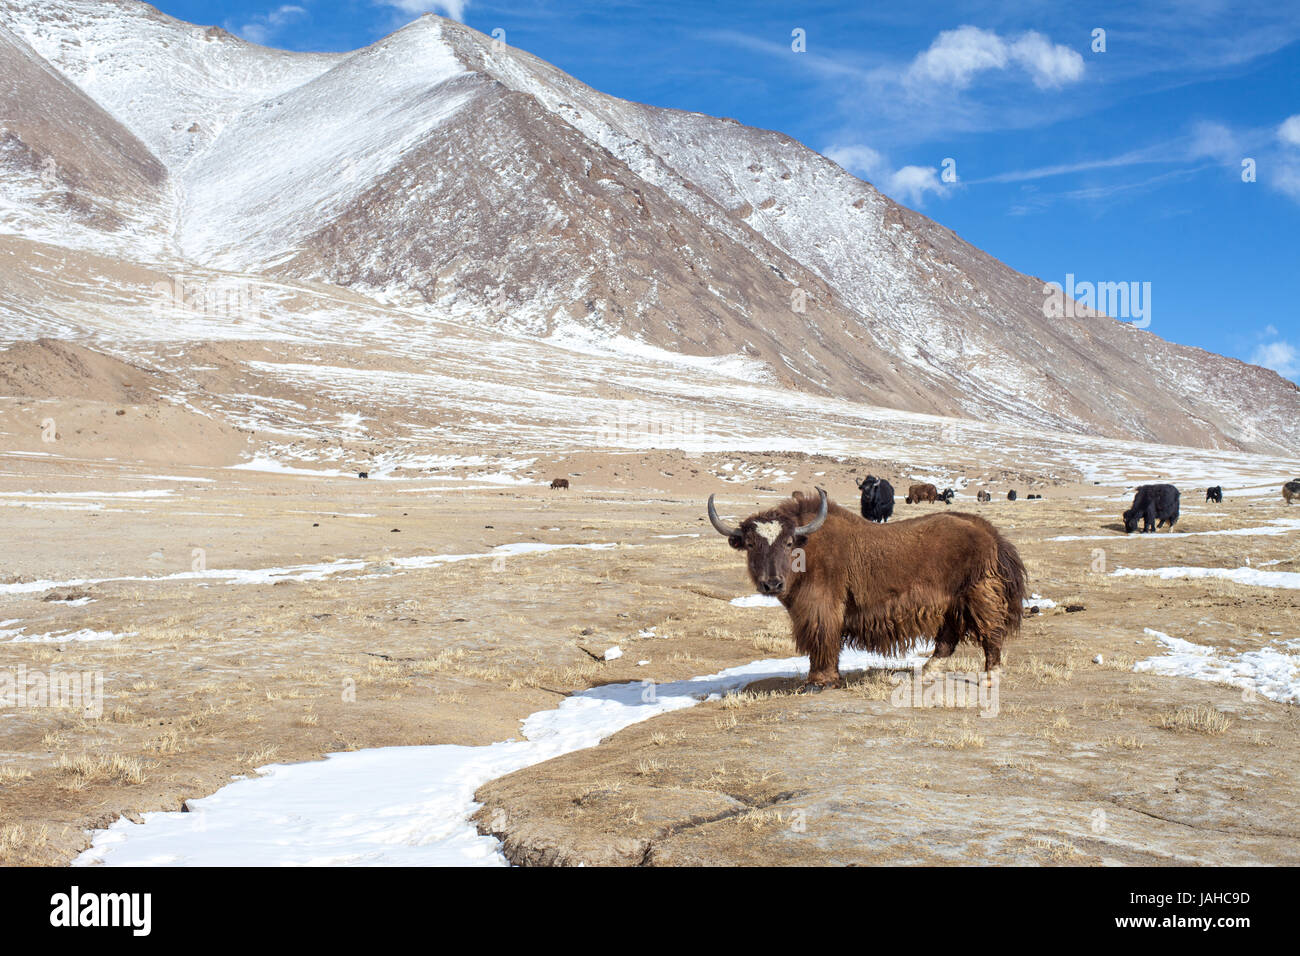 A Brown Yak grazing on the Pologongka pass in the Changthang region of Ladakh during winter. Stock Photo